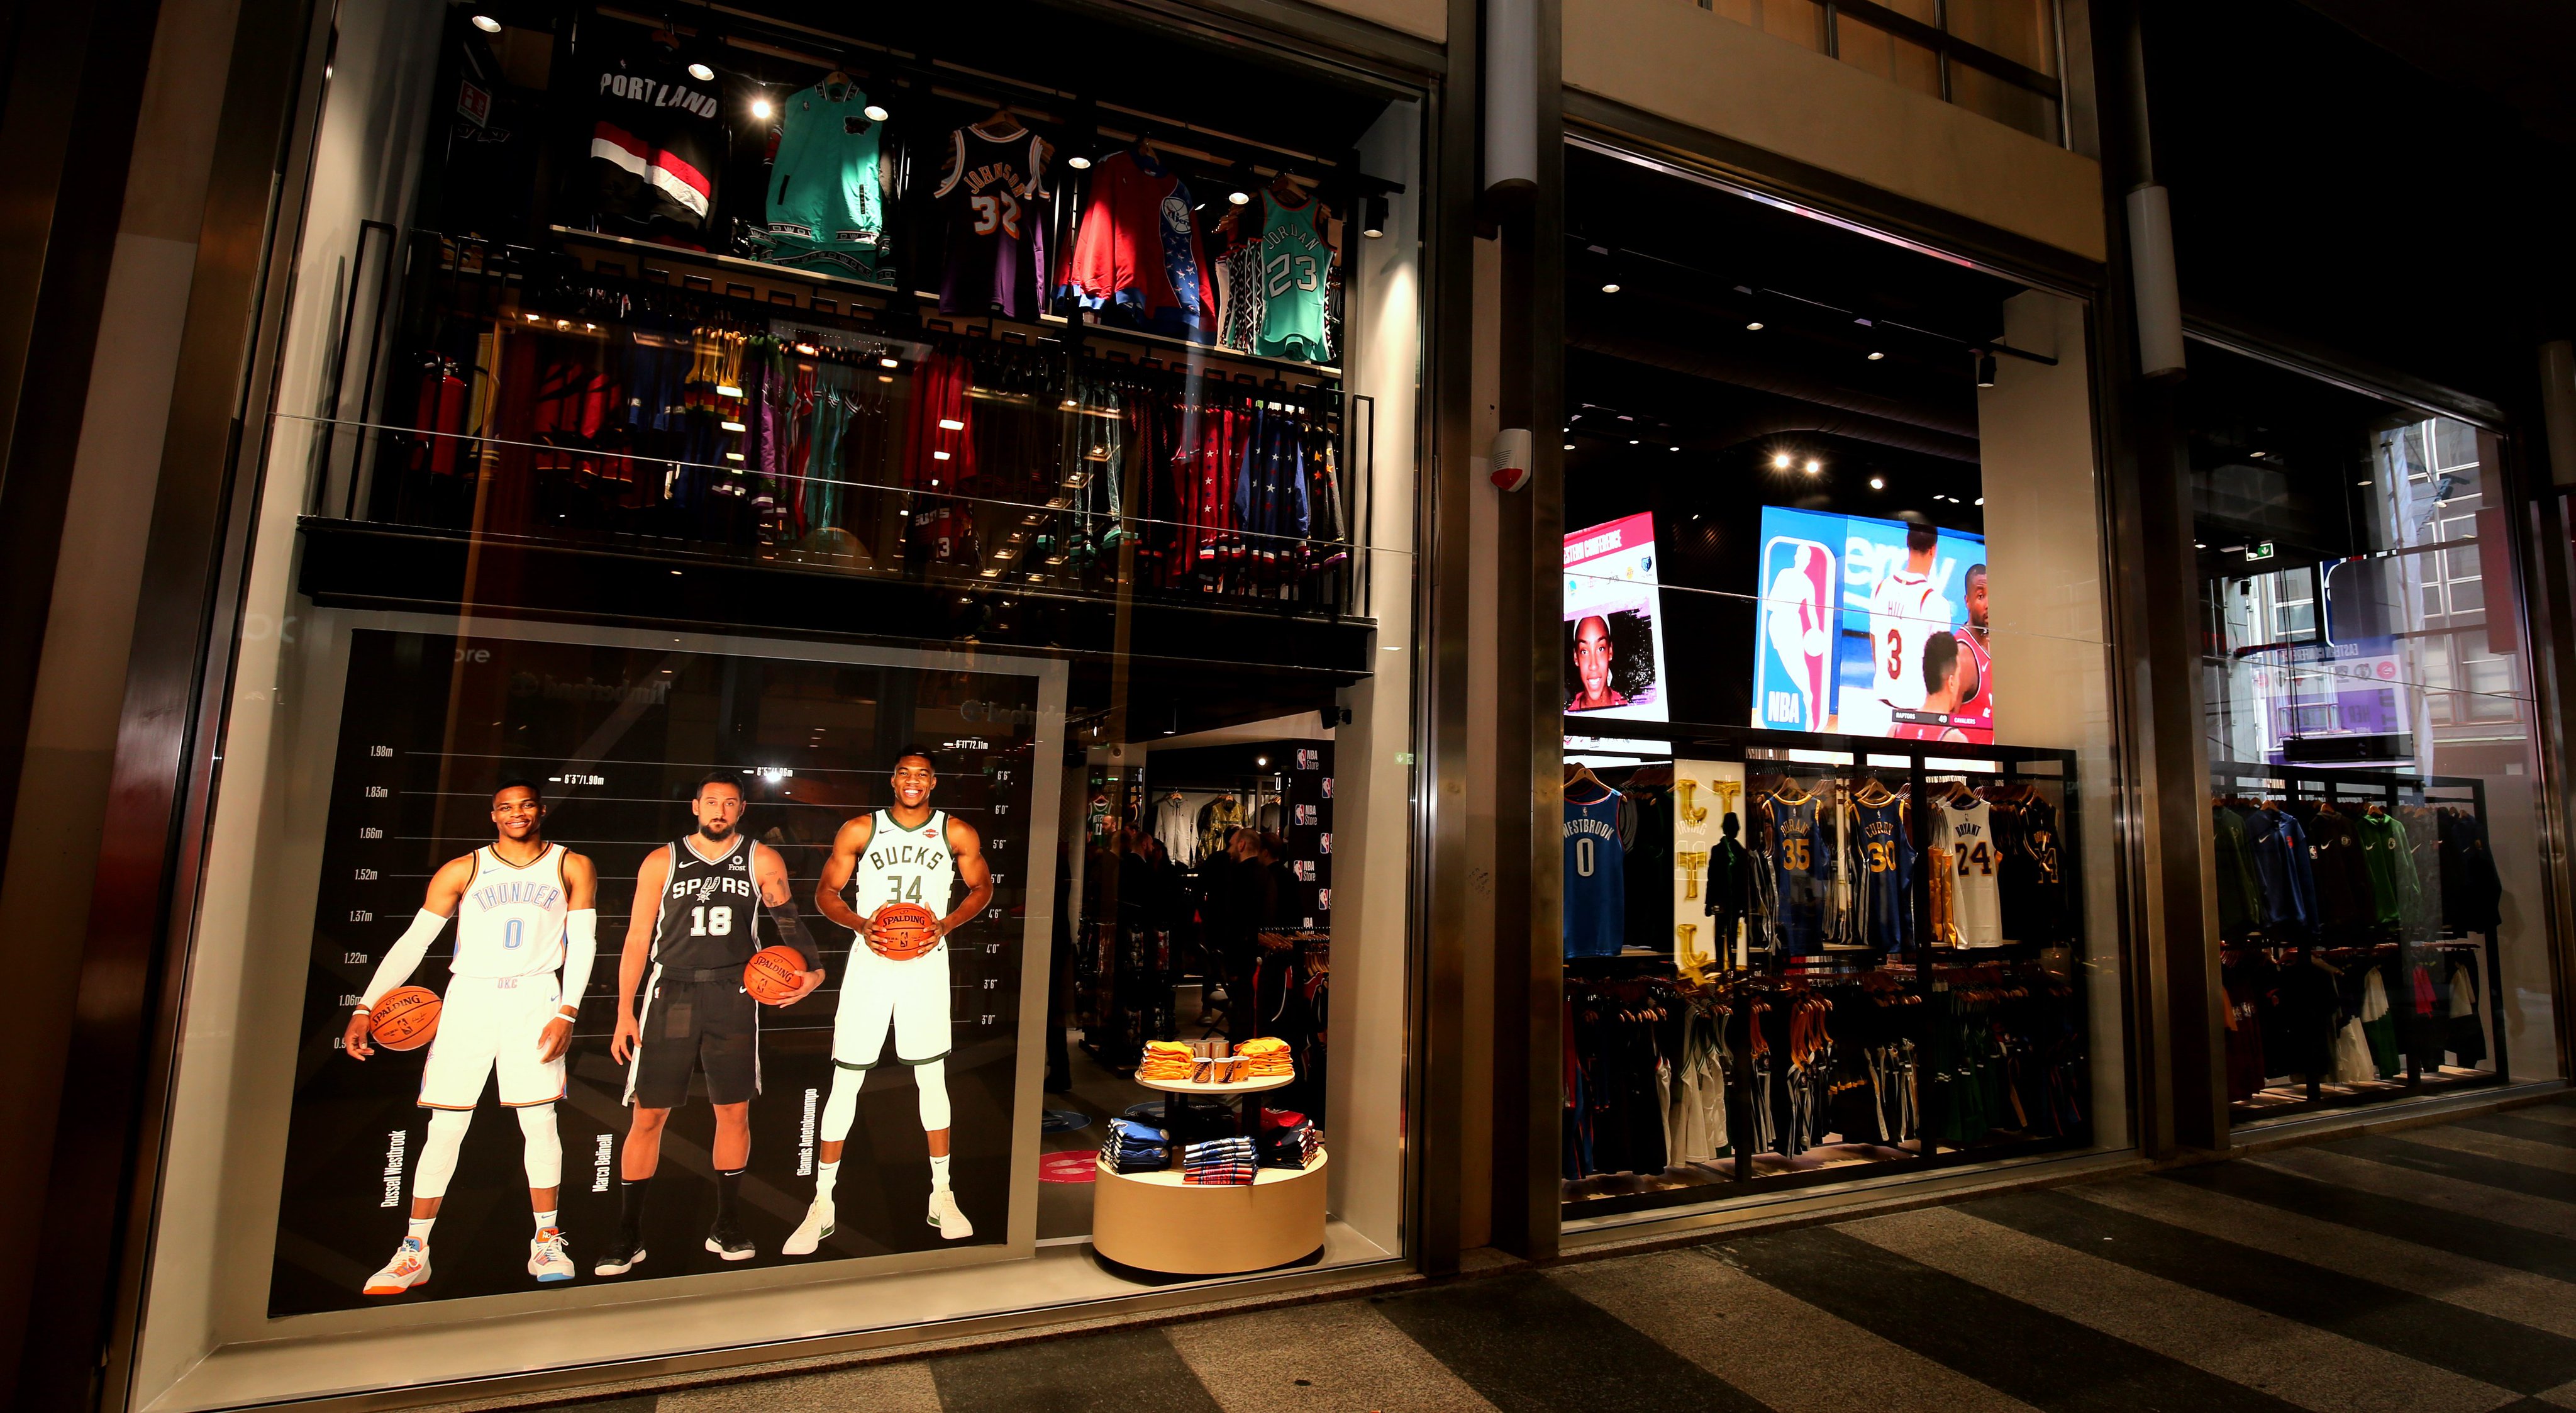 Today in Milan will open the first European NBA Store